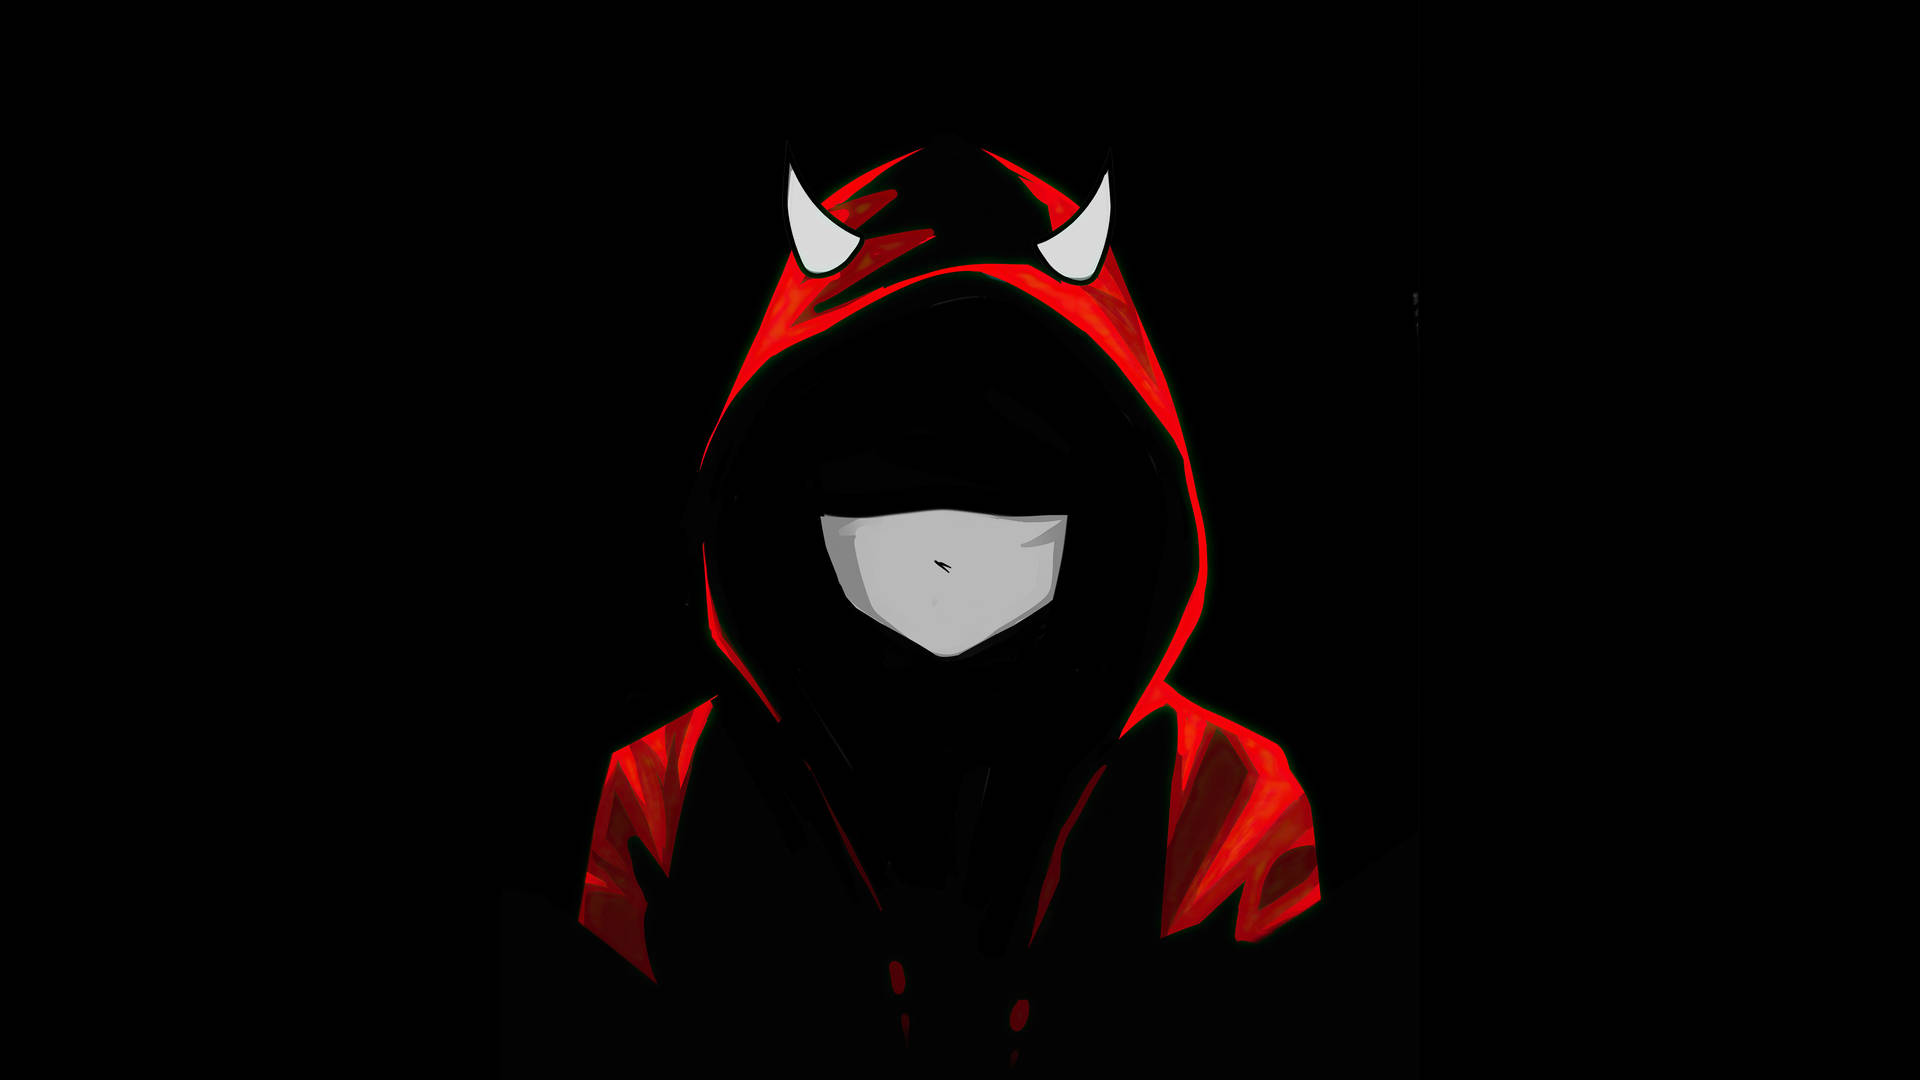 Cool Devil Red Hoody Background